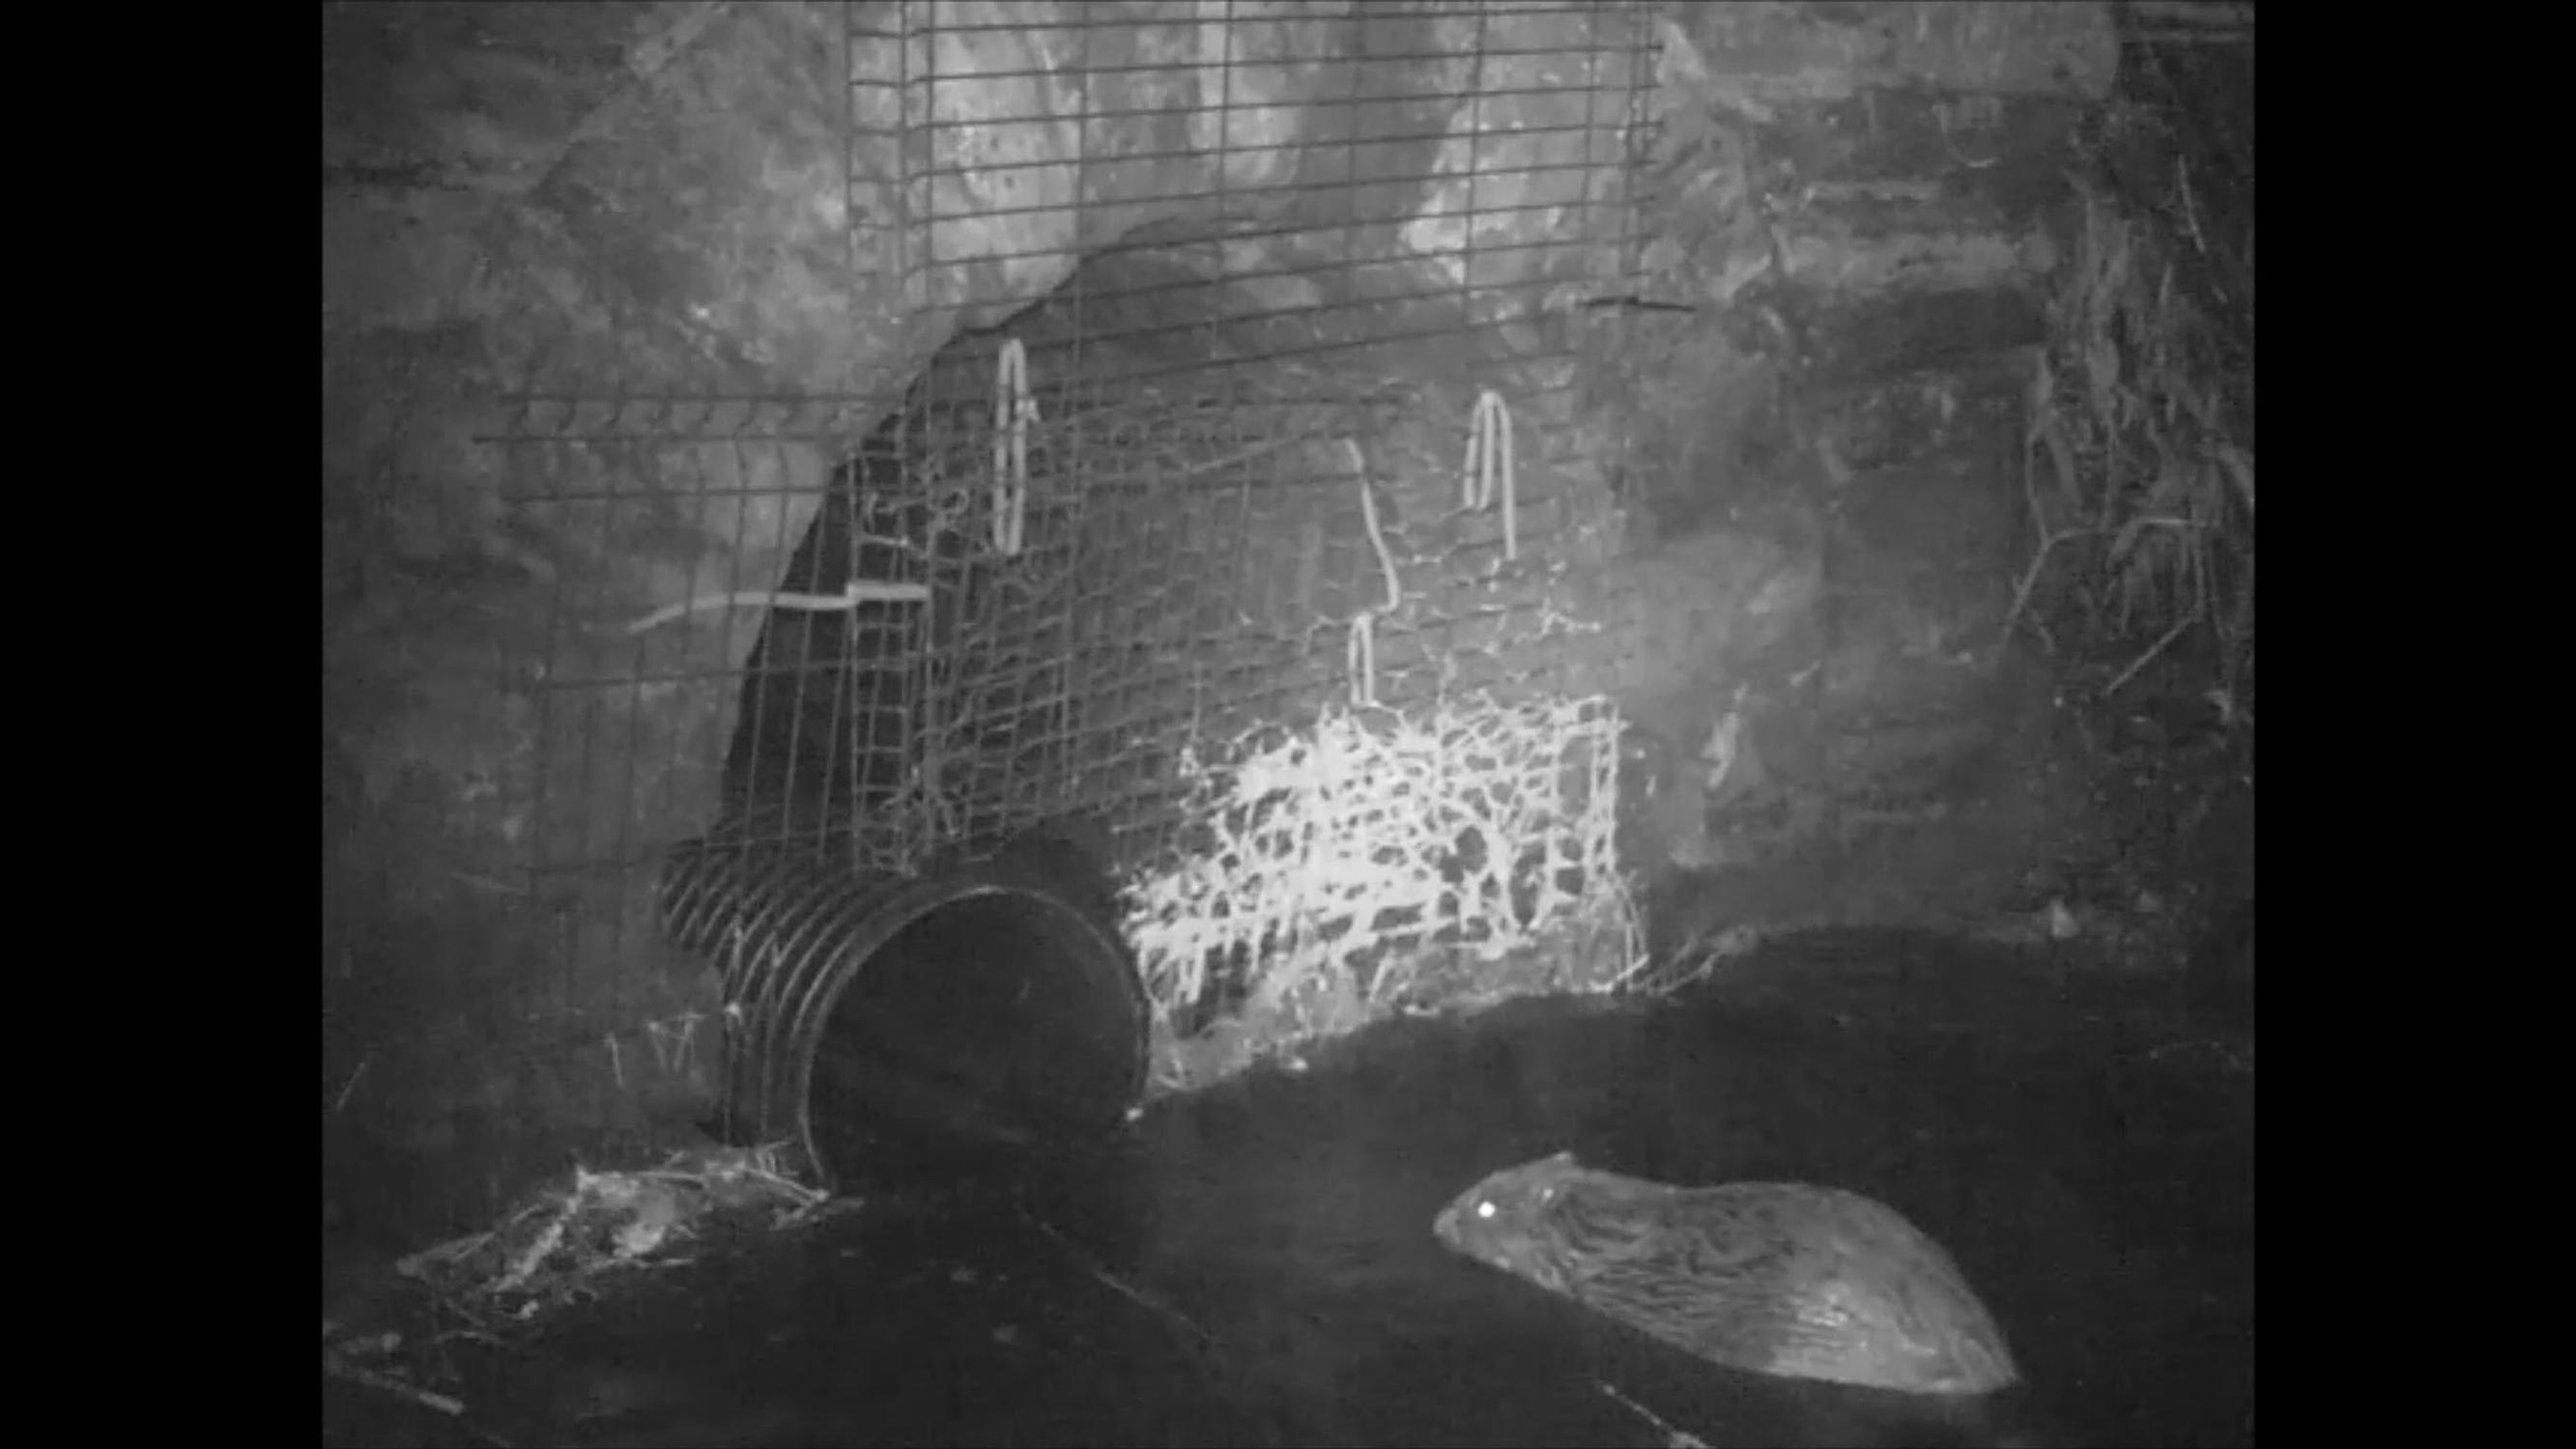 The Perthshire beaver tunnel